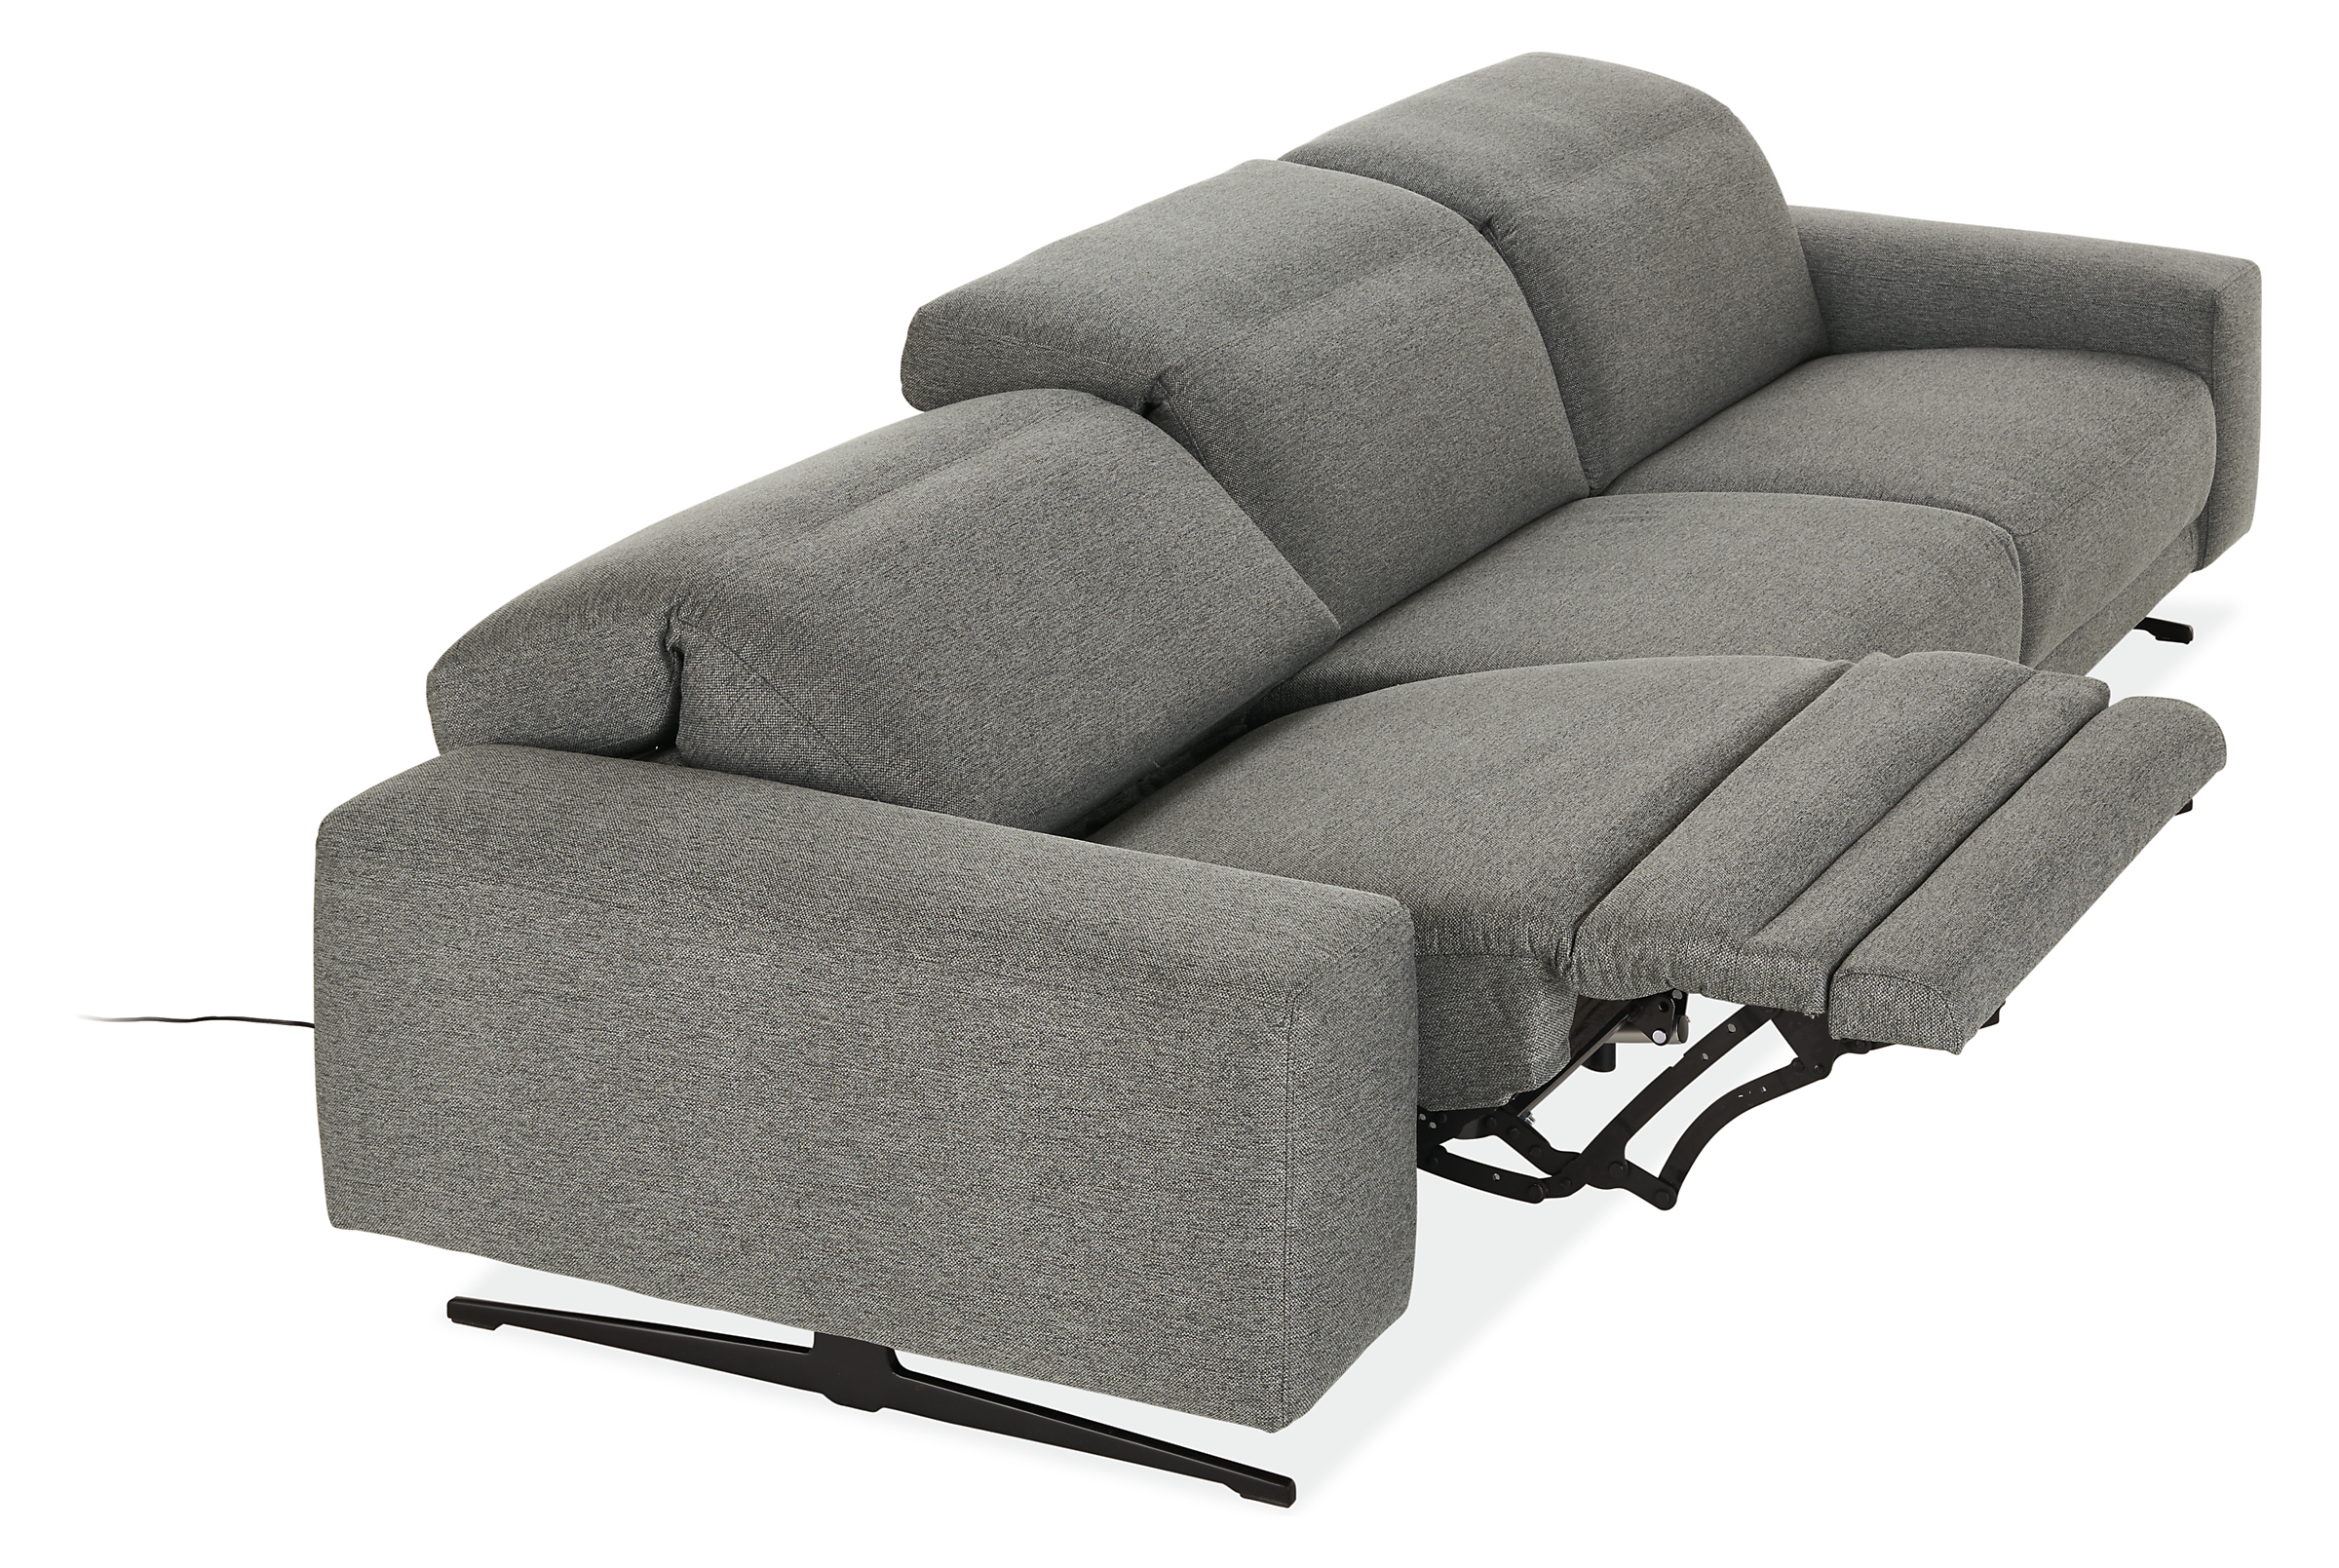 Detail of Gio 3 piece sofa with power in fabric shown in full recline position with headrest lowered position.